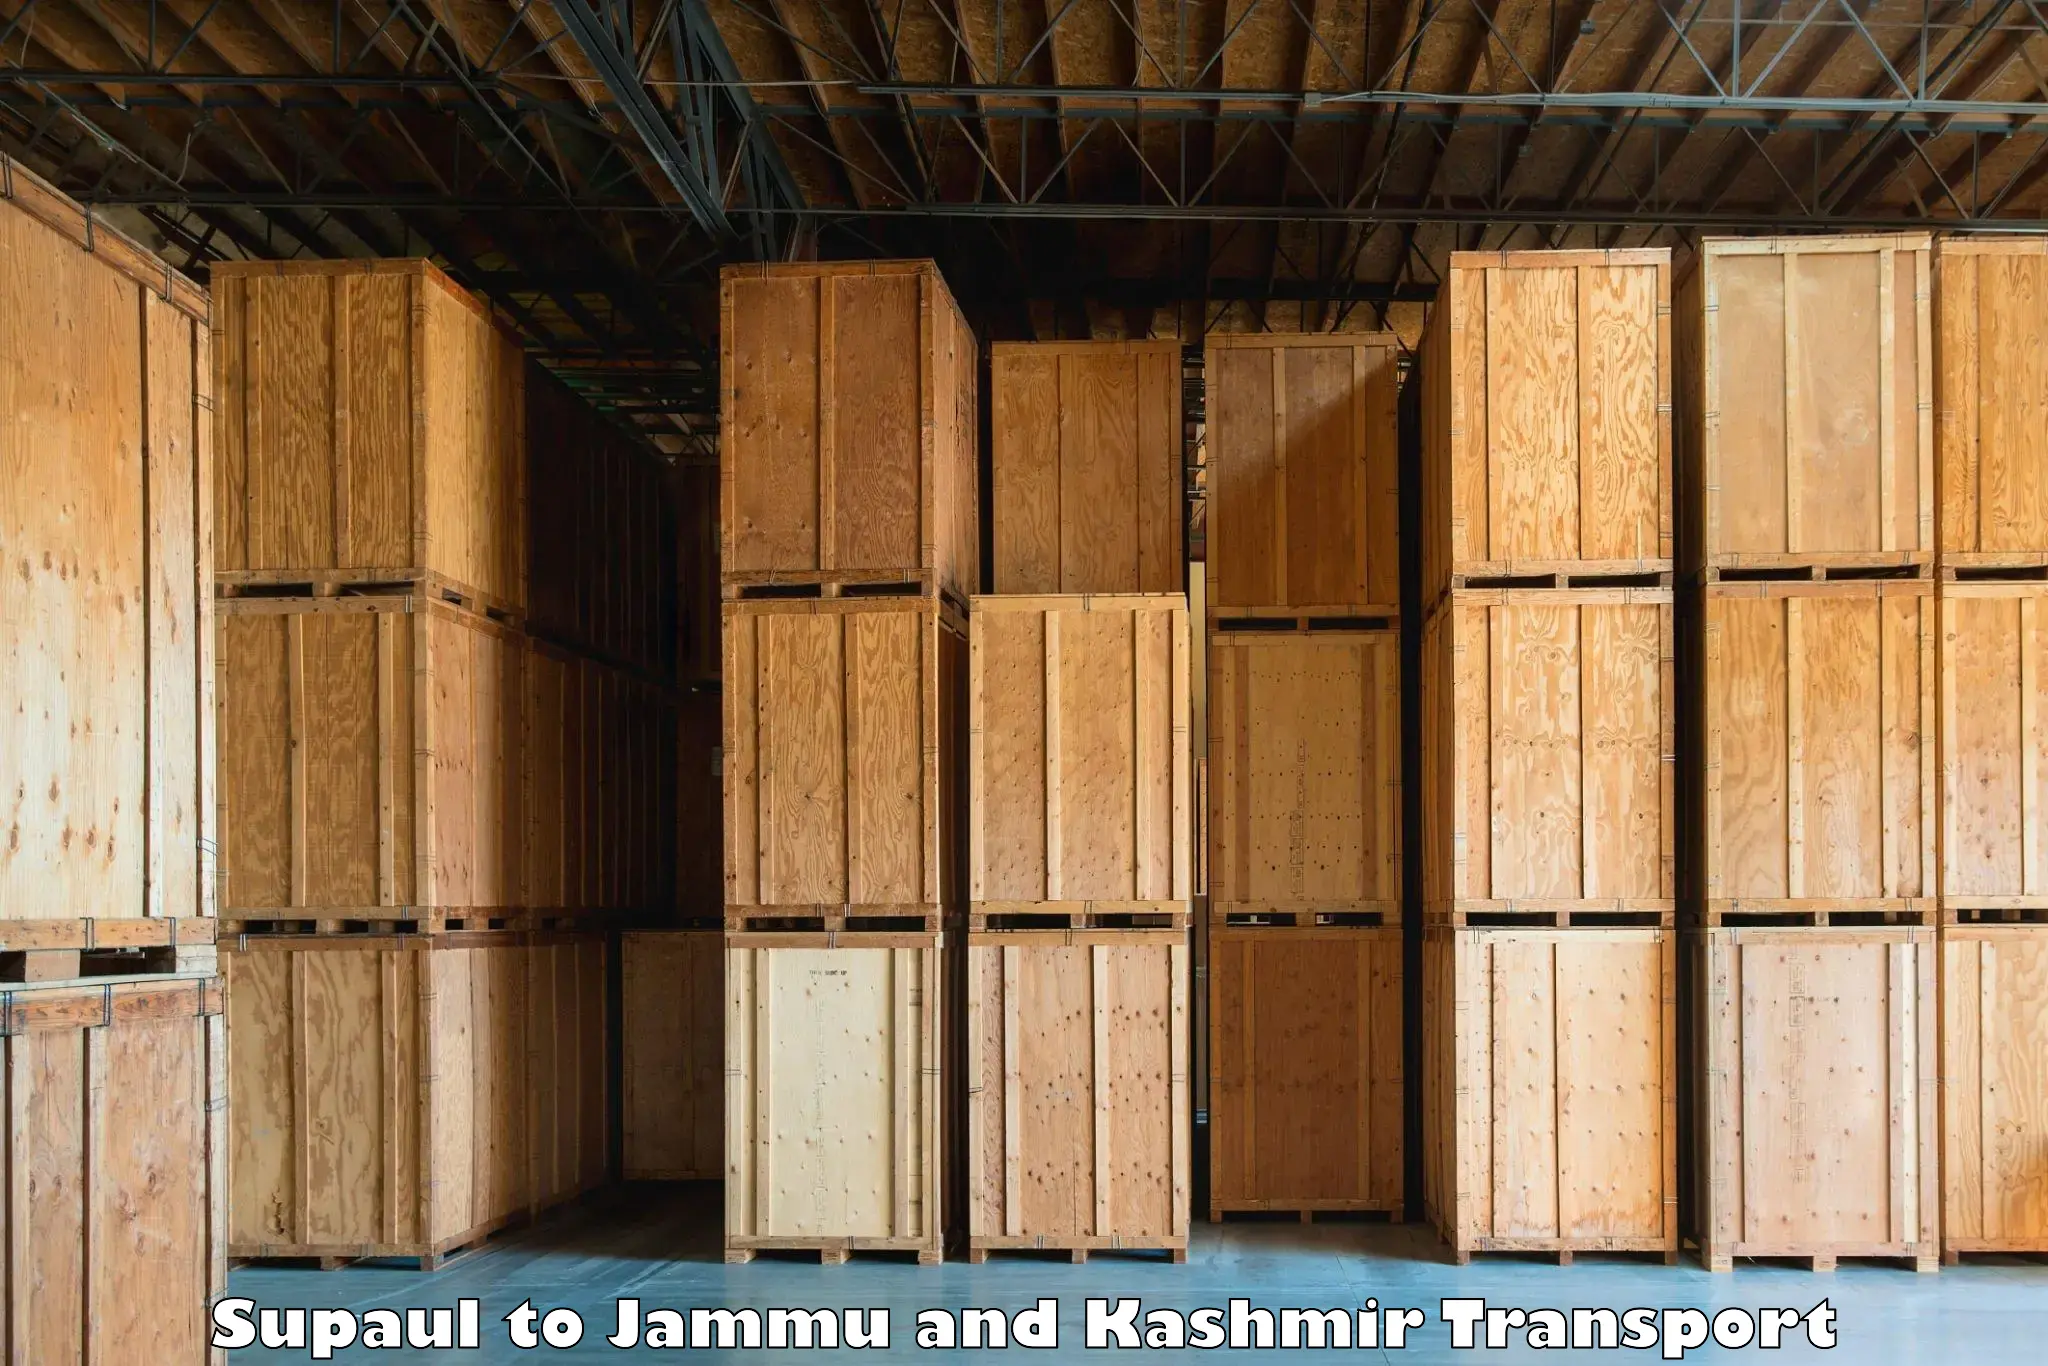 Daily parcel service transport Supaul to Jammu and Kashmir